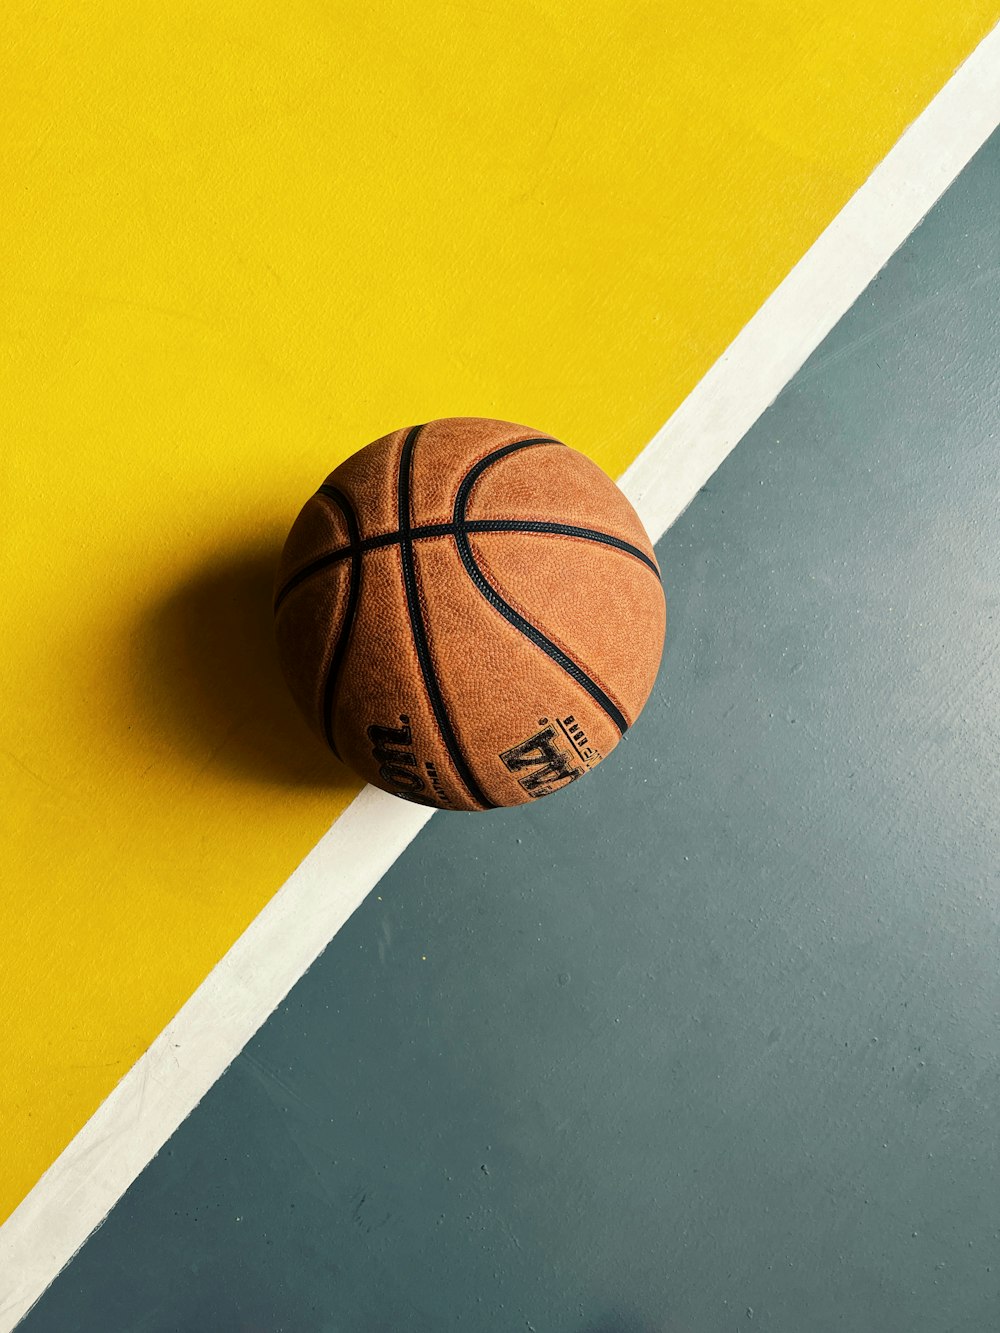 a basketball on a yellow surface